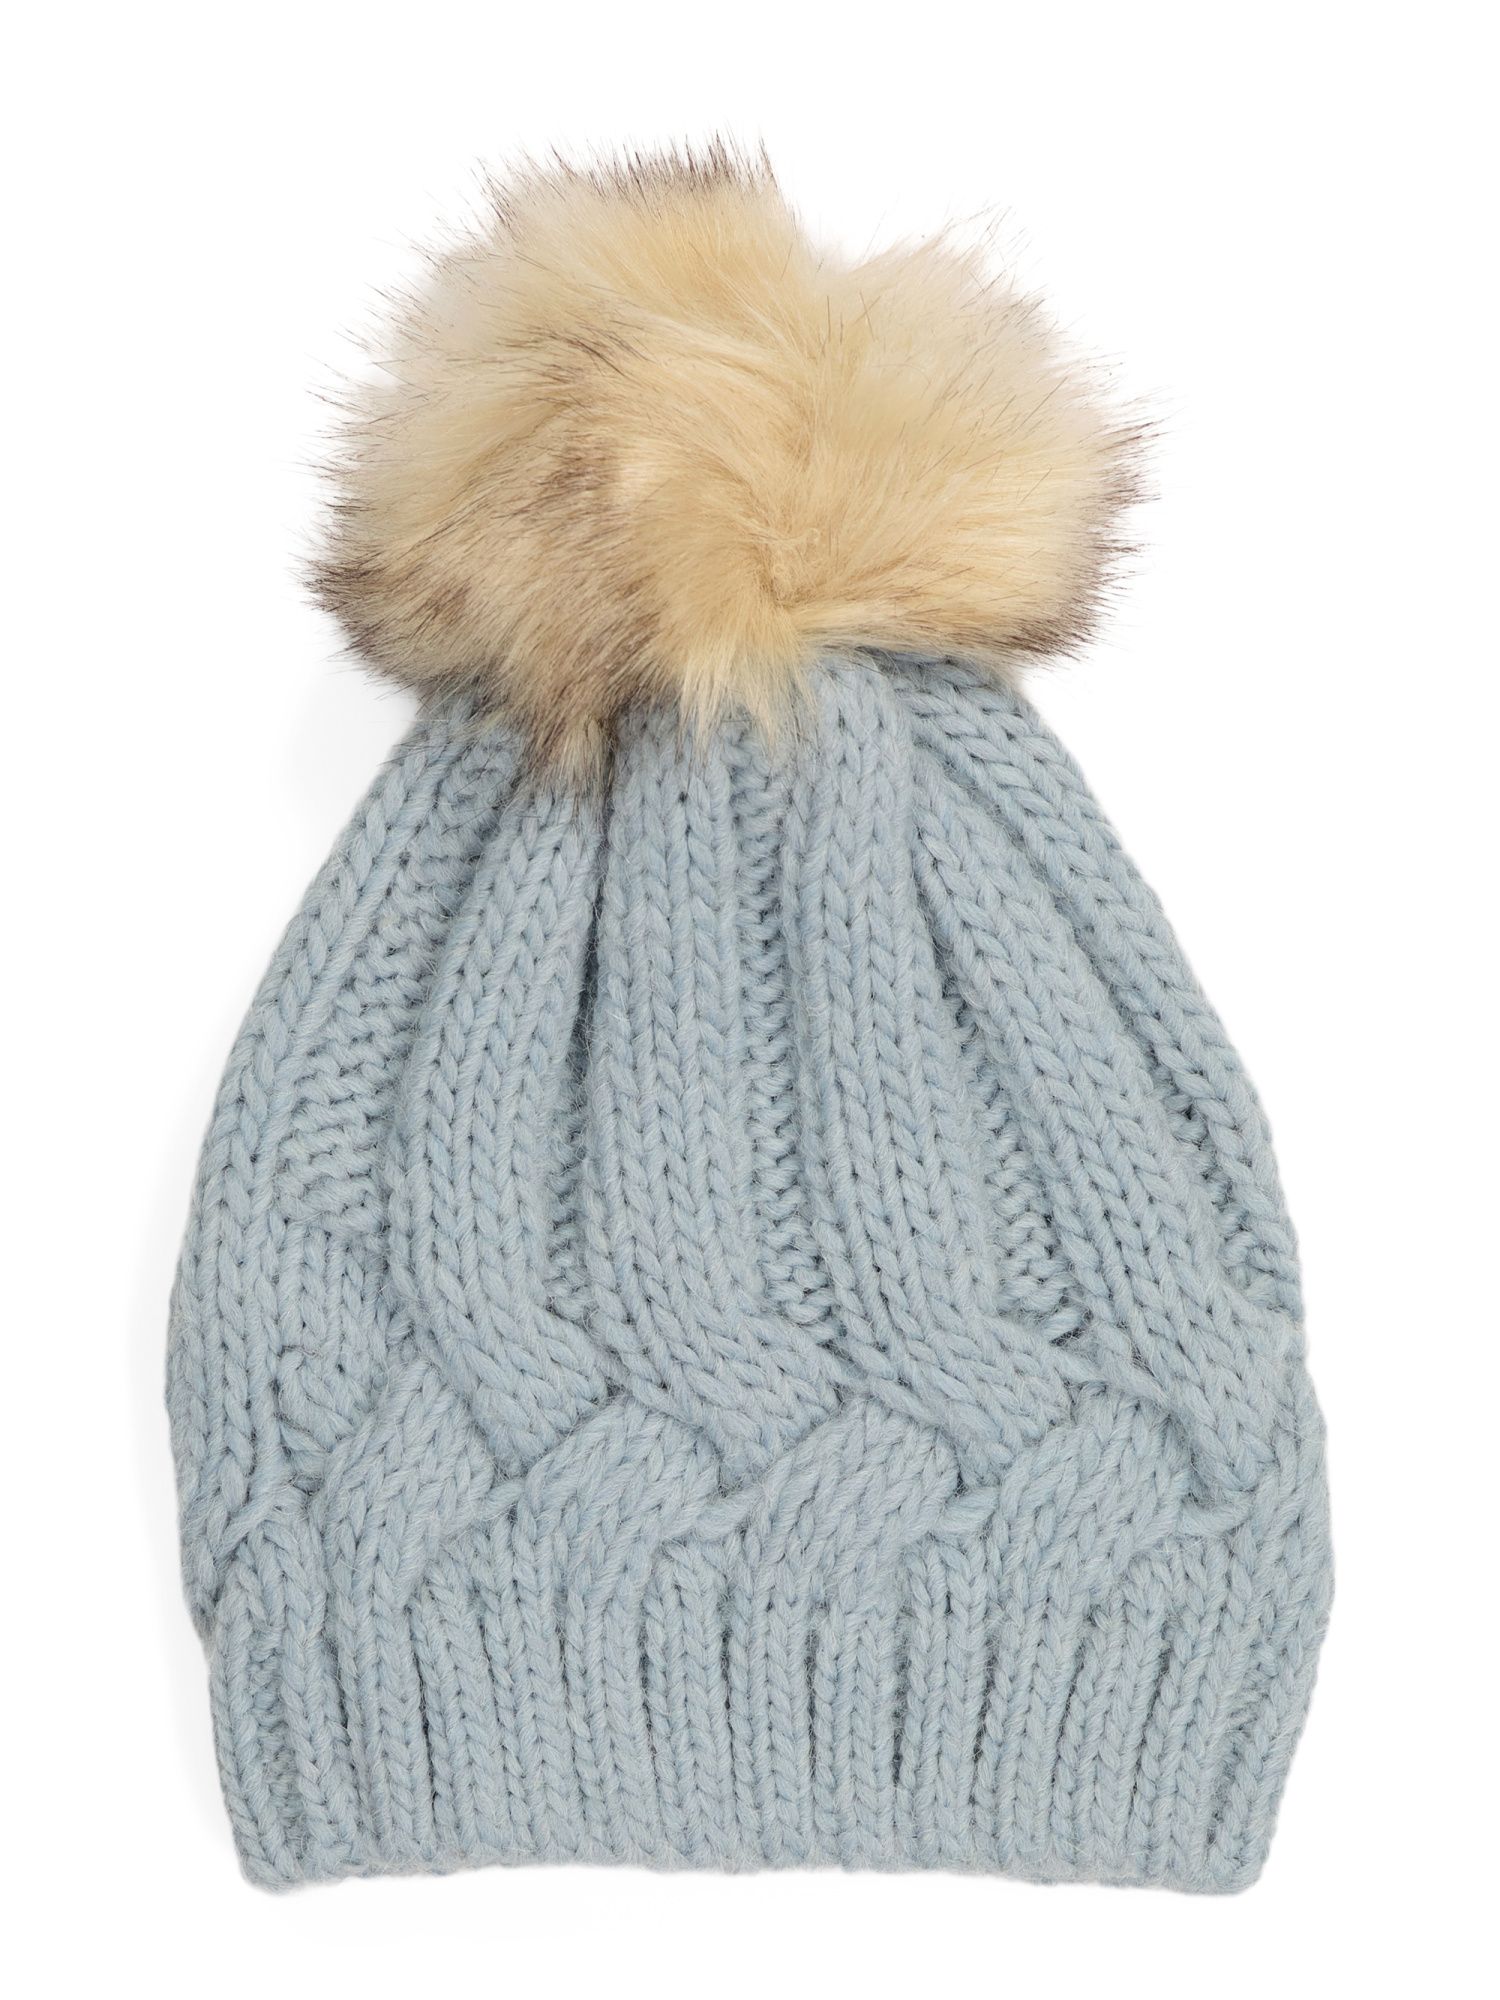 Made In Italy Braided Knit Beanie With Faux Fur Pom | Hats, Gloves & Scarves | Marshalls | Marshalls